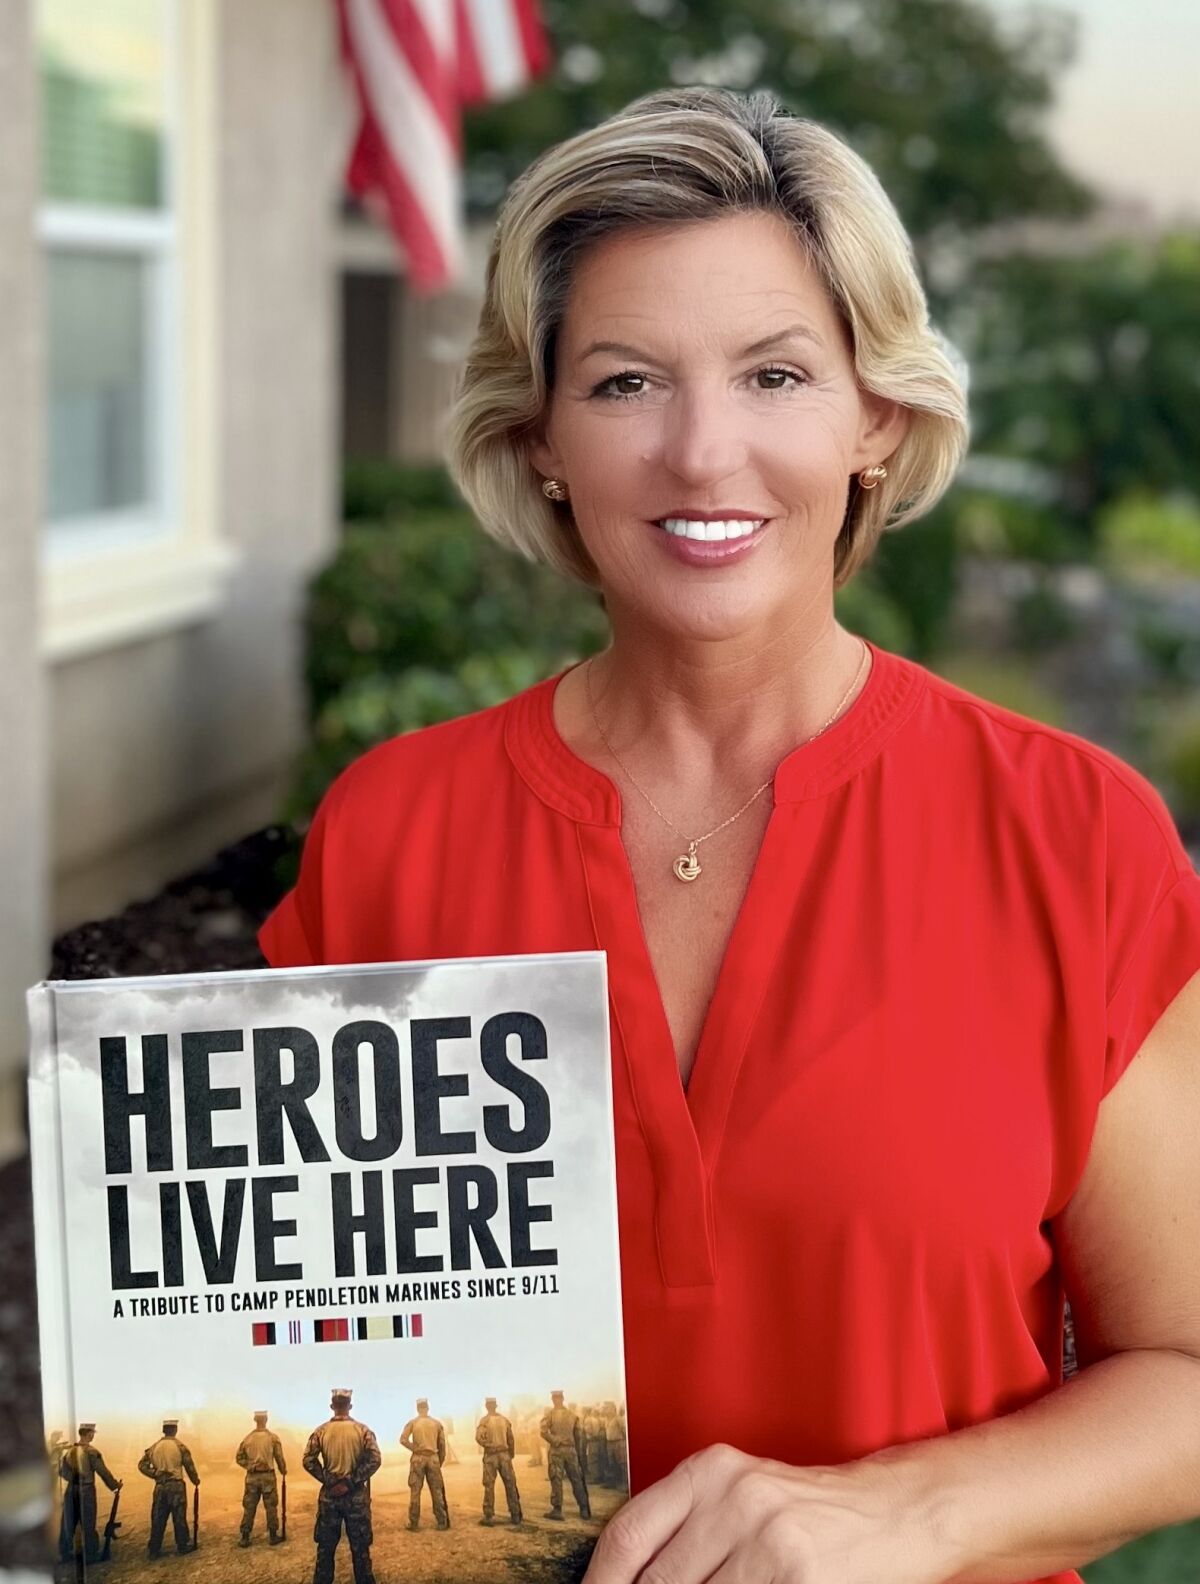 Warwick Bookstore will feature reporting from Marine Corps war correspondent Amy Forsythe on Sunday, July 9 in La Jolla.